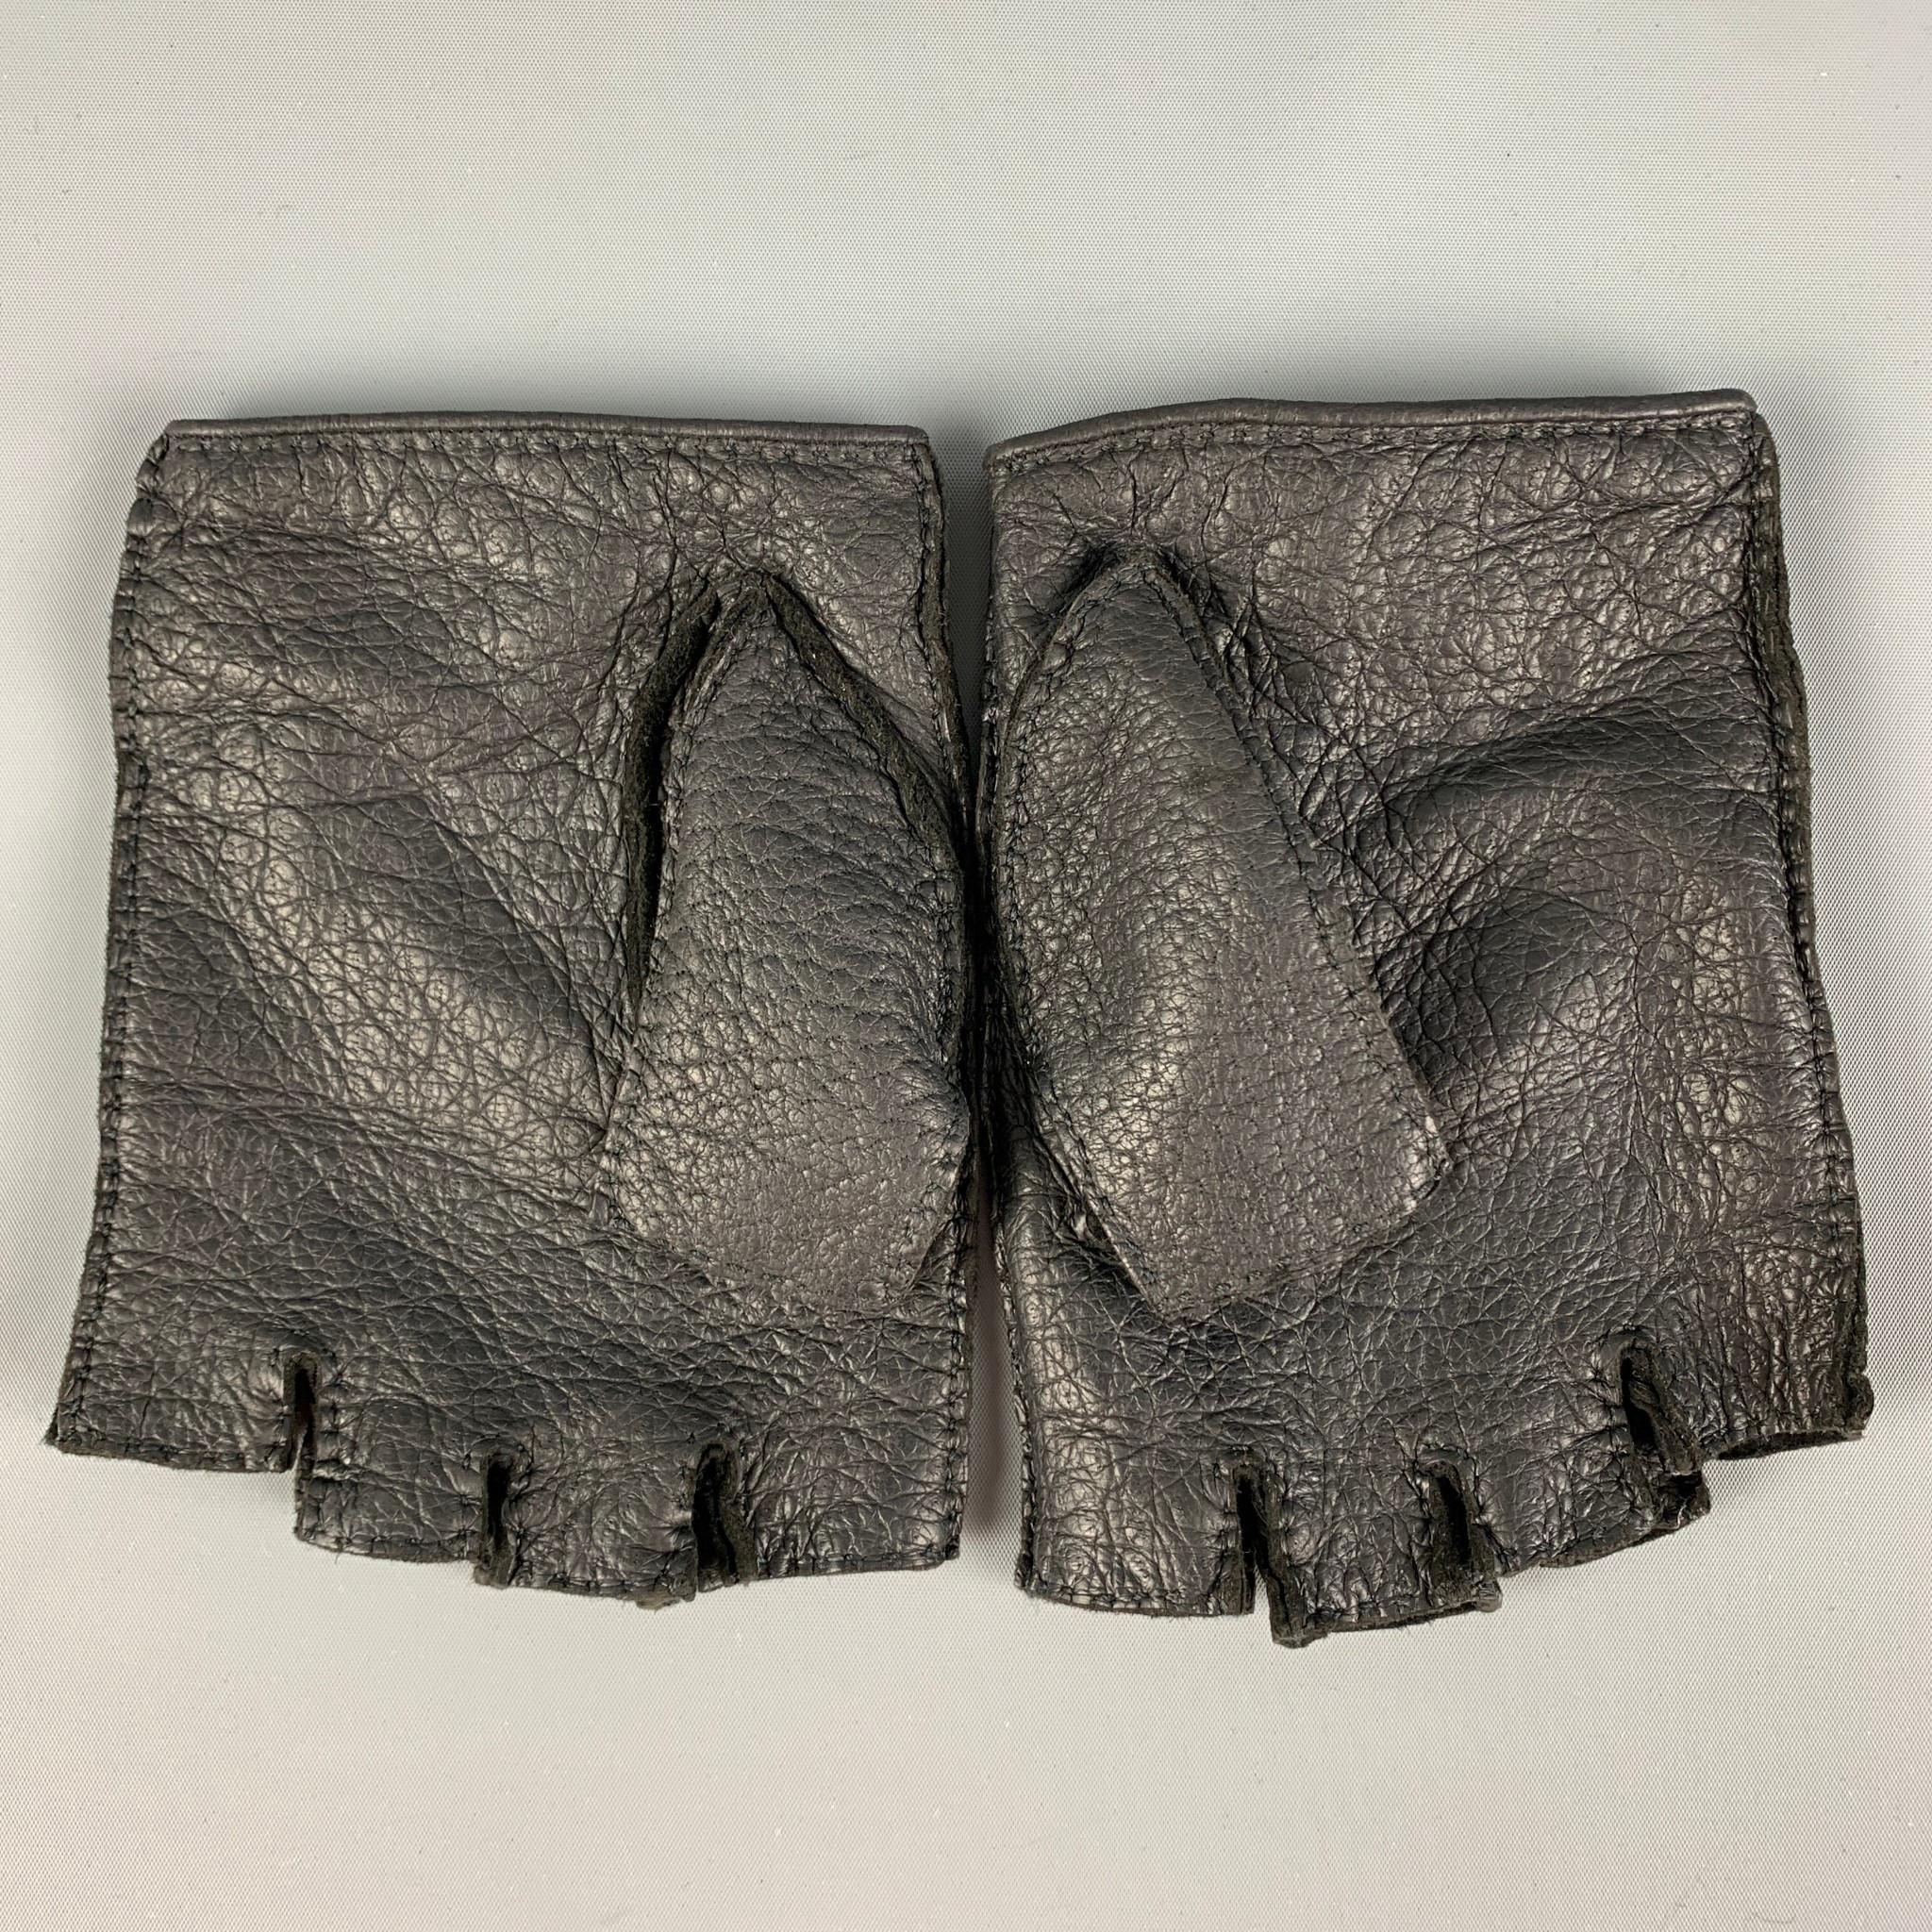 HERMES gloves comes in a black leather featuring a fingerless style, perforated design, and a snap button closure. Made in France. 

Good Pre-Owned Condition.
Marked:9

Measurements:

Height: 6 in.
Length: 4 in.